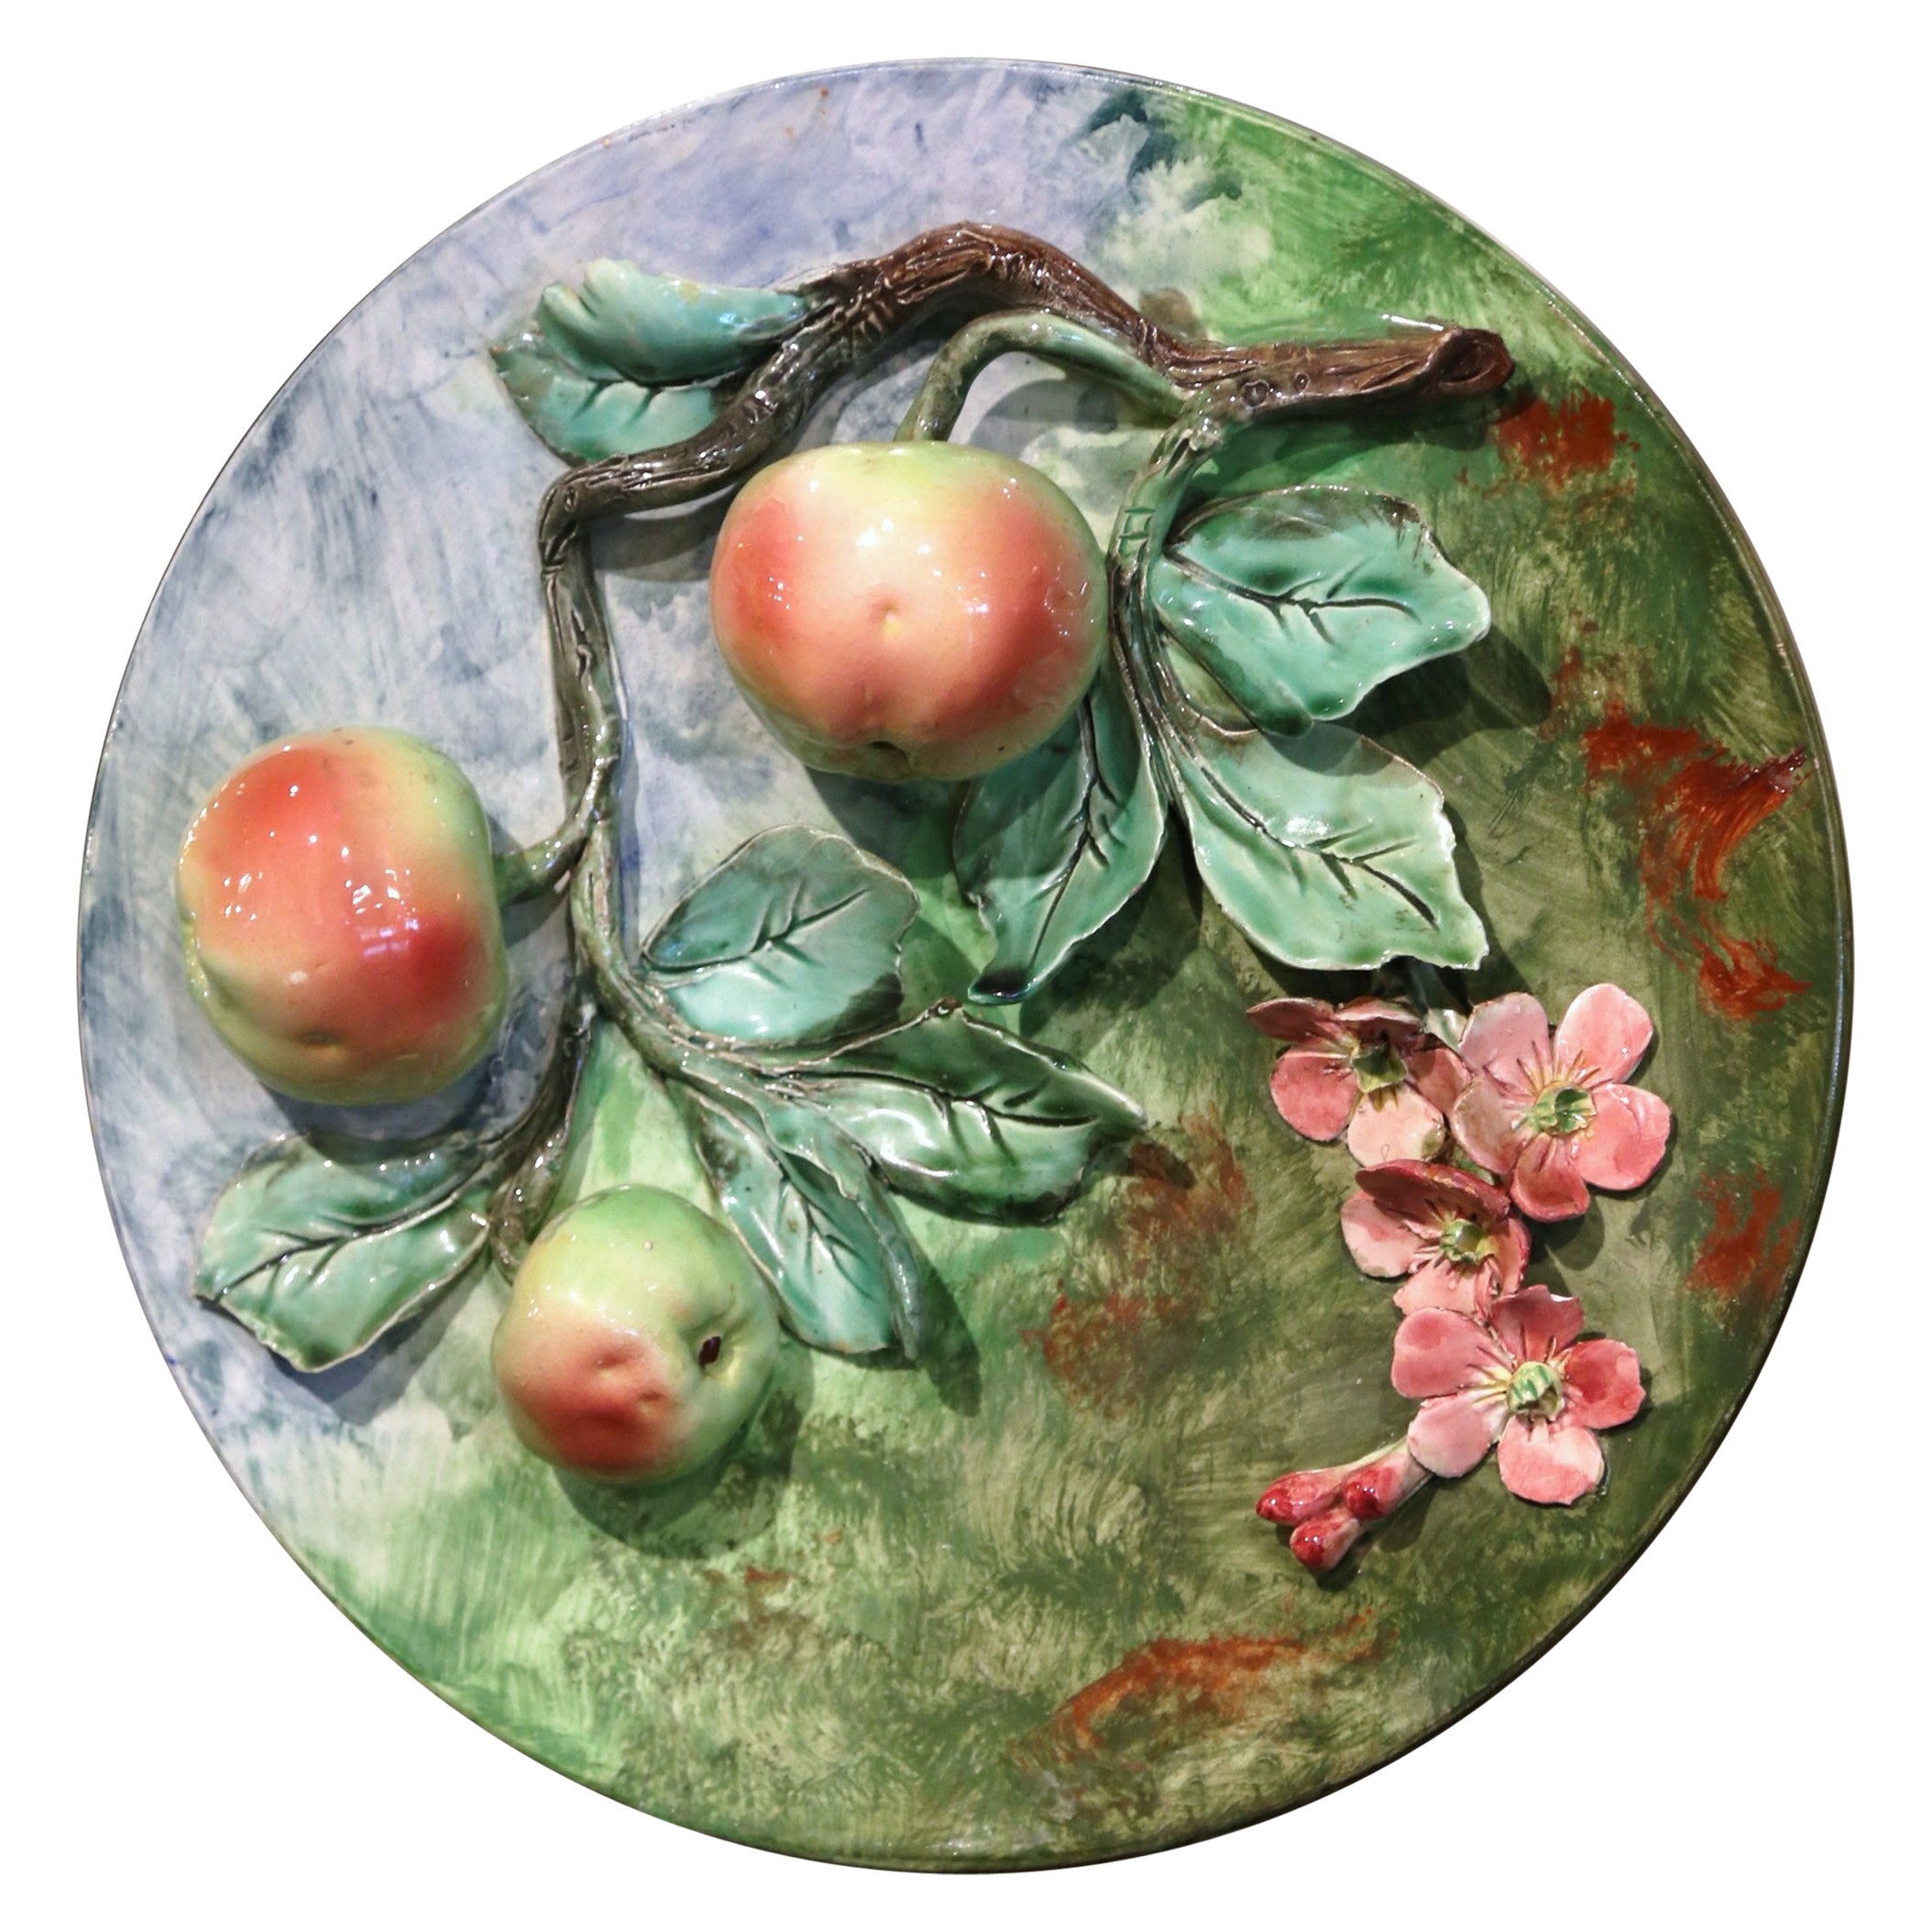 19th Century French Ceramic Barbotine Wall Platter with Apples Signed Longchamp